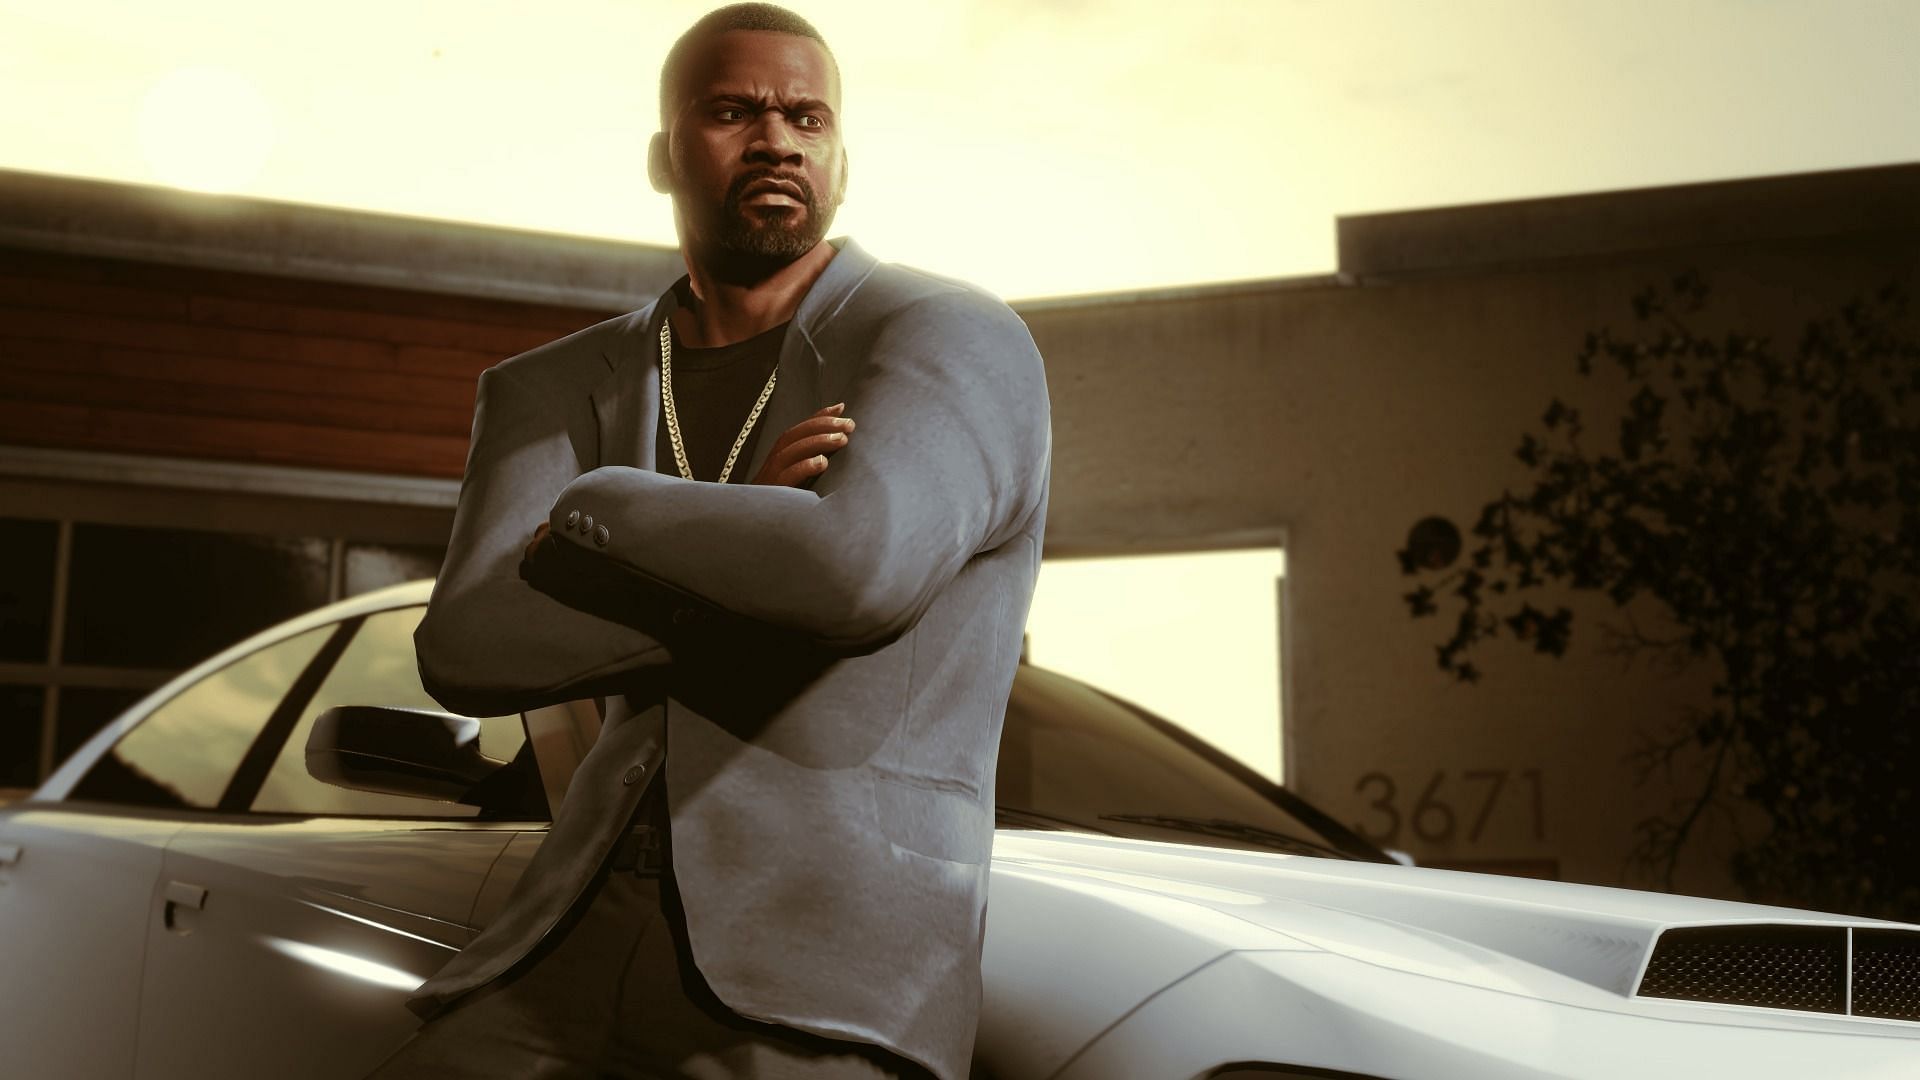 Franklin offers Payphone Hits in GTA Online through the Agency (Image via Rockstar Games)